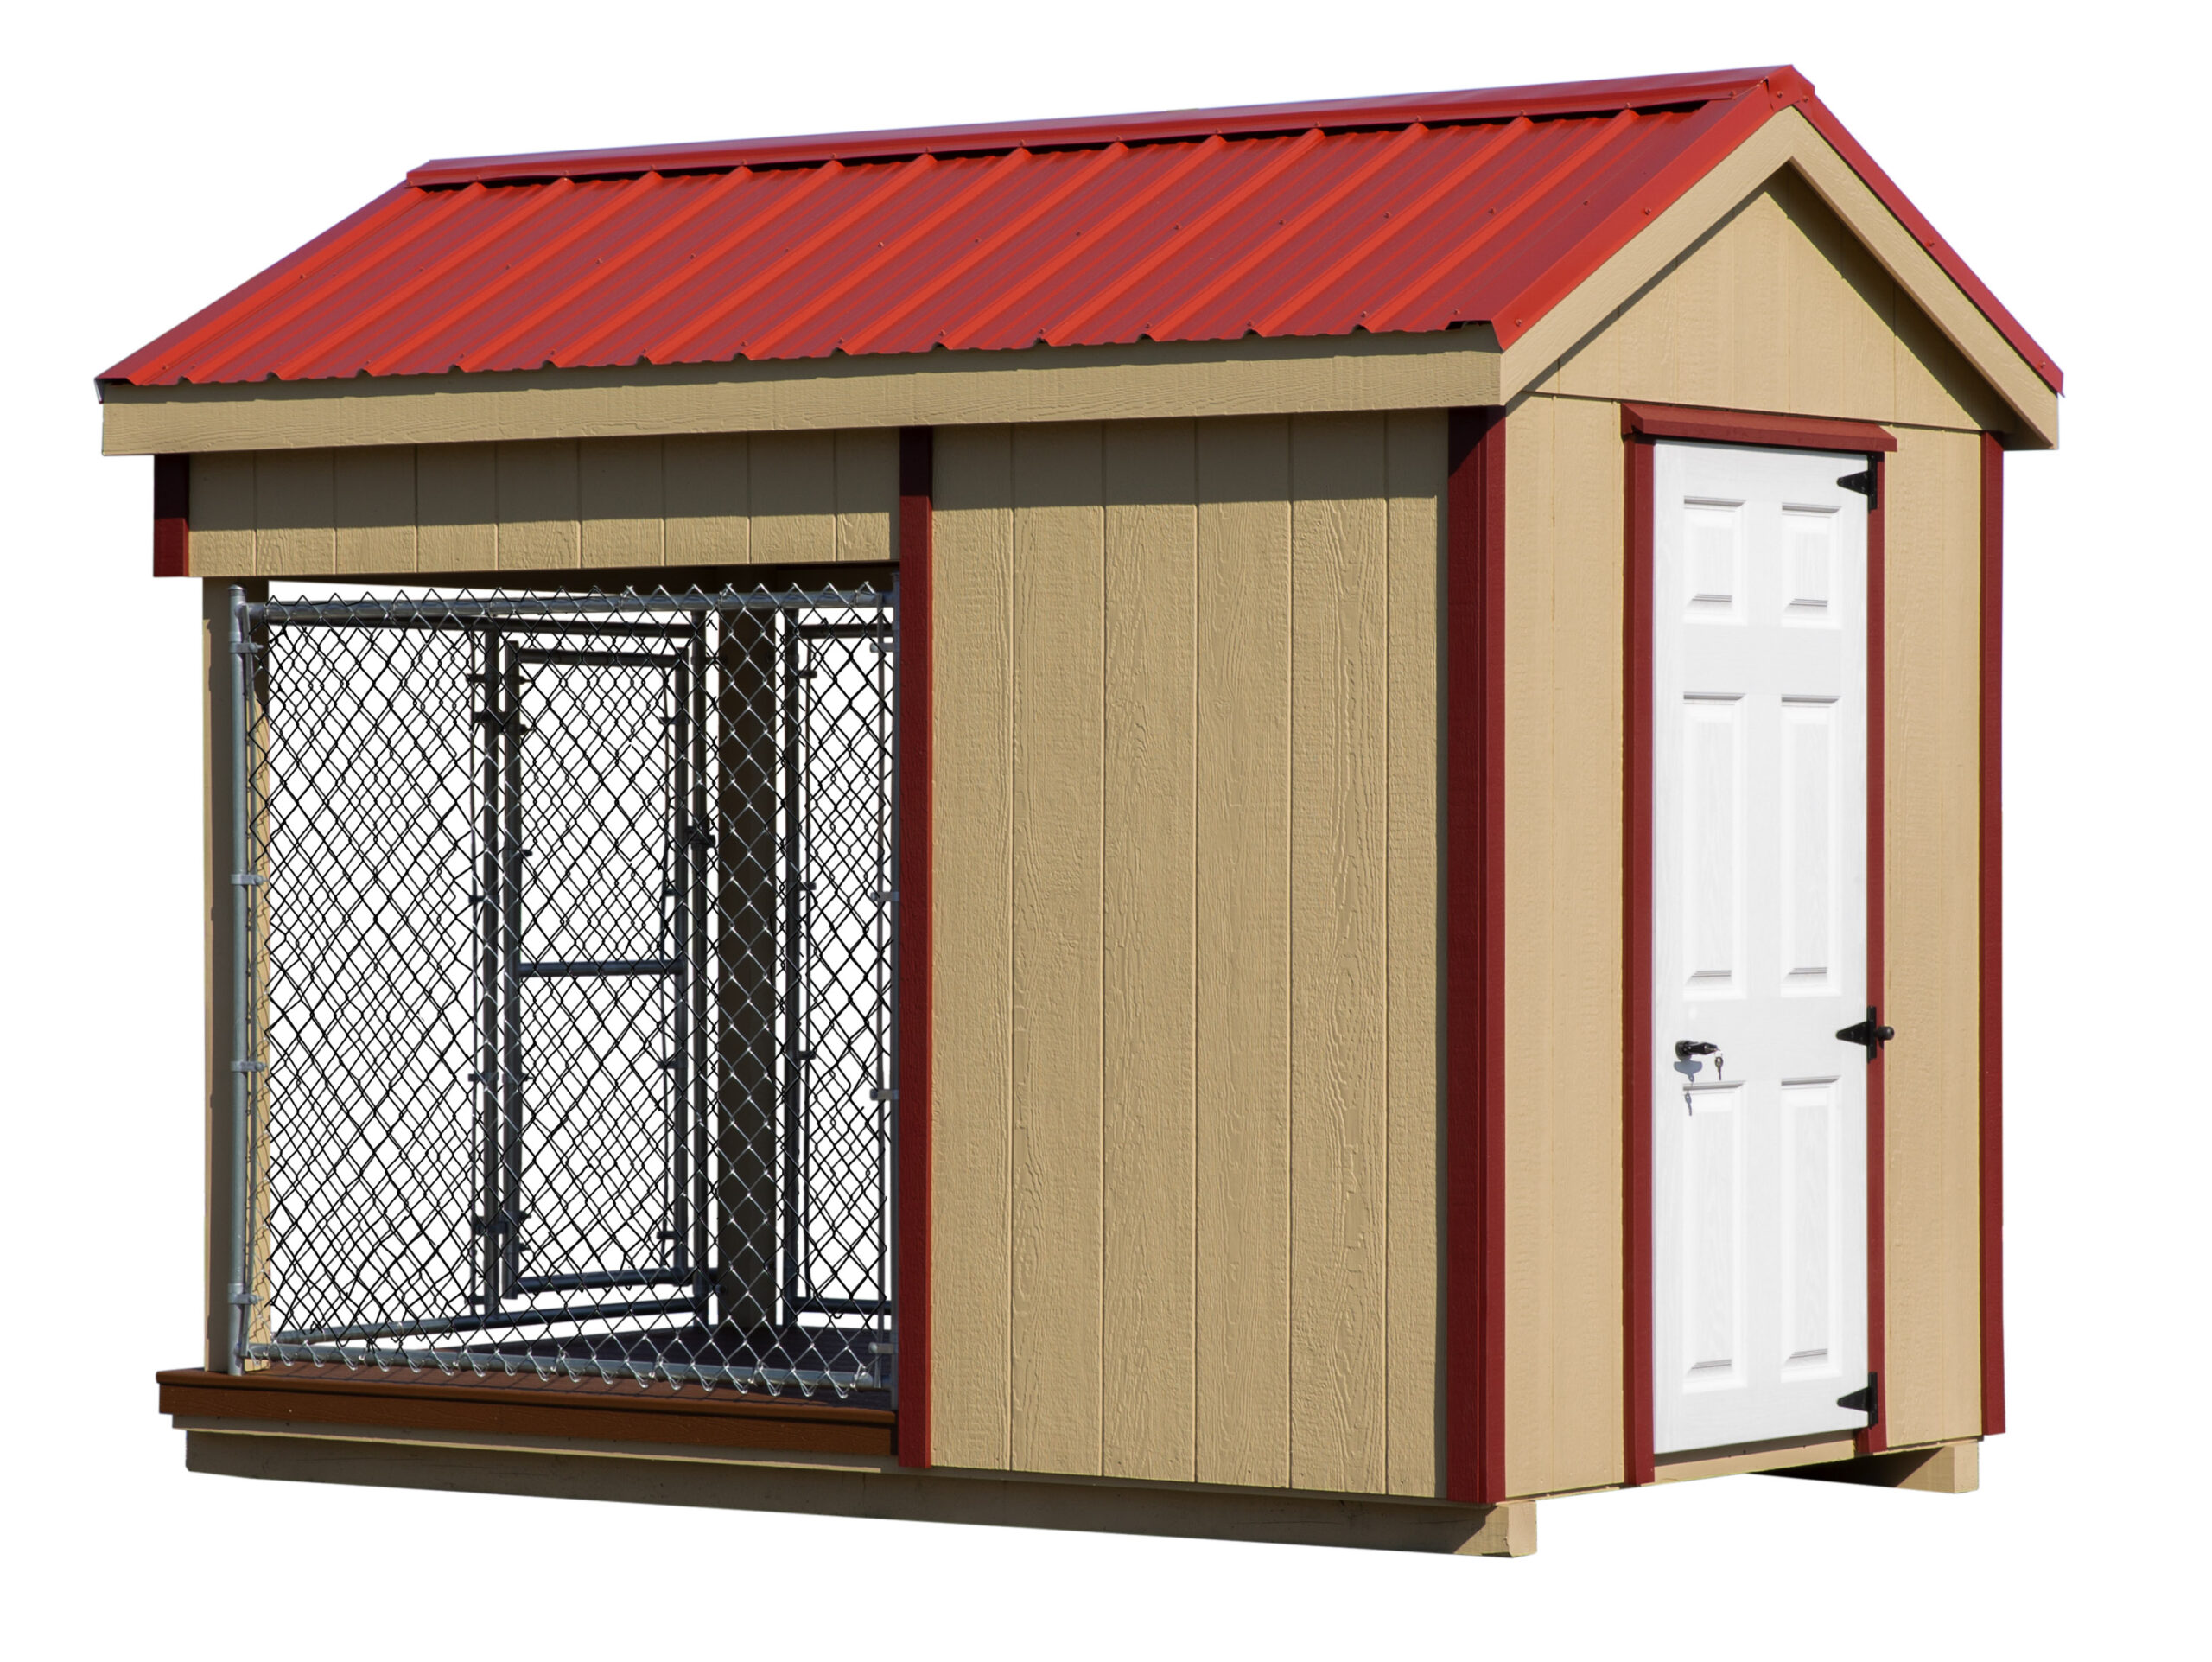 Back view of a 6x10 single capacity kennel